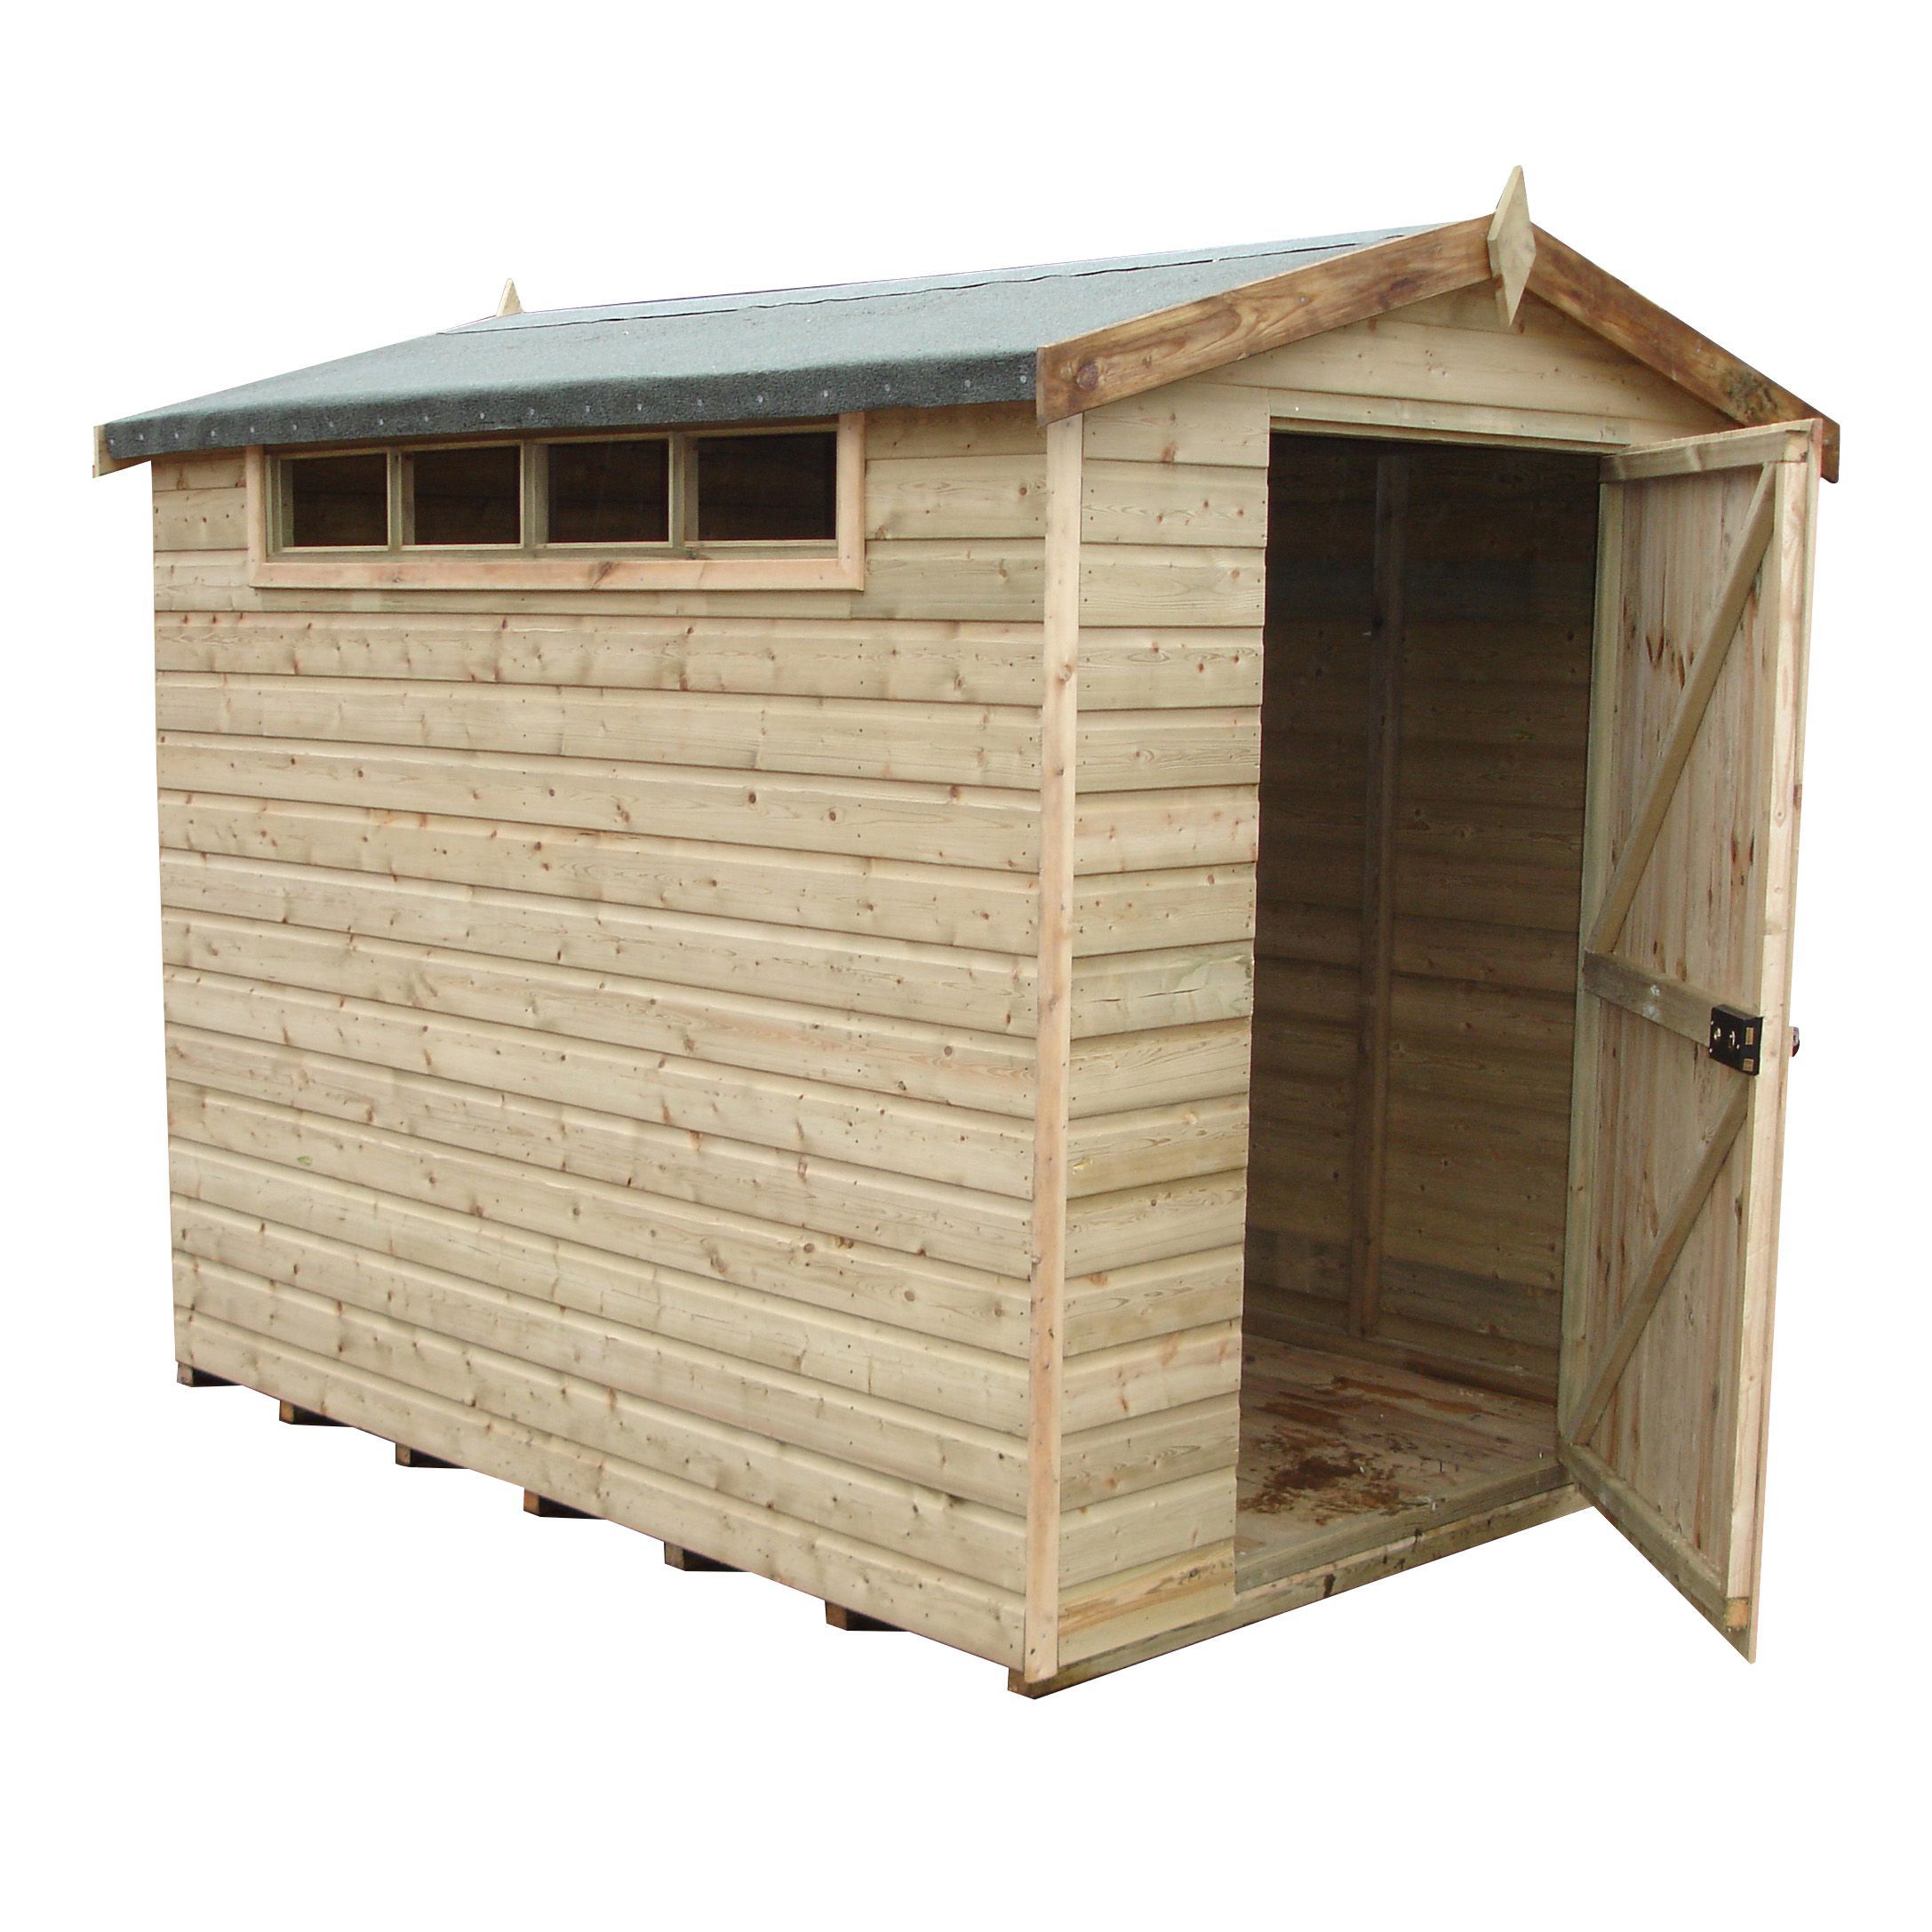 Shire Security Cabin 10X8 Ft Apex Shiplap Wooden Shed With Floor - Assembly Service Included